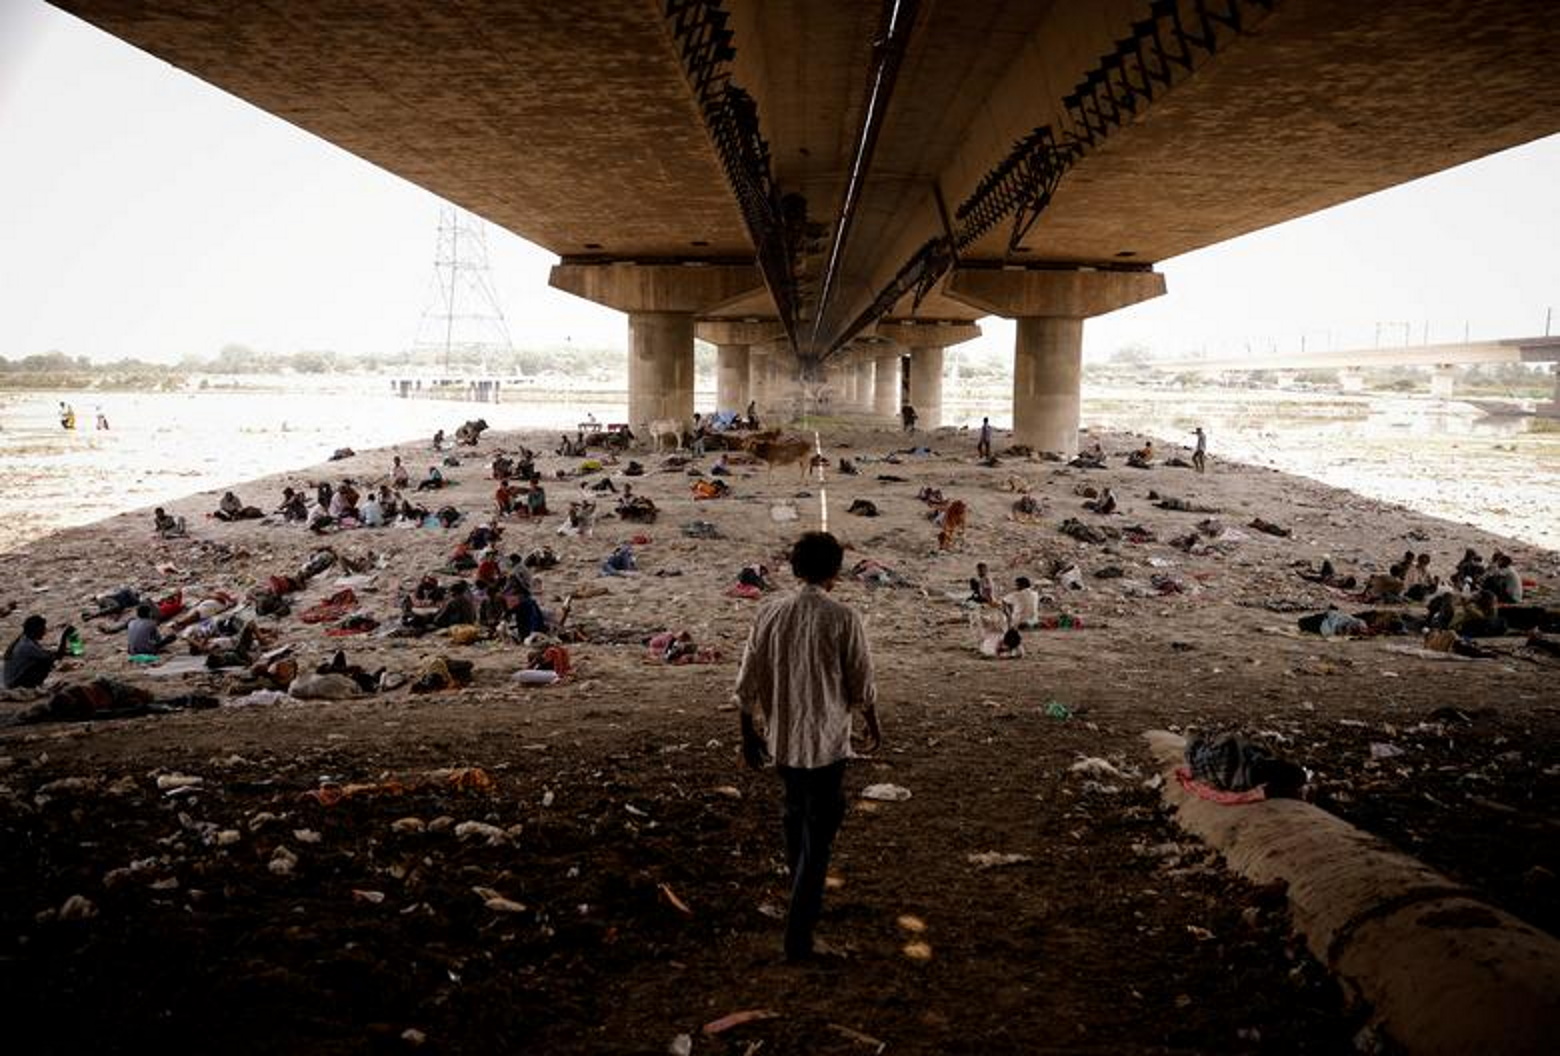 People sleep on the dried-up Yamuna riverbed under a bridge during a heatwave in New Delhi, India, 2 May 2022. Photo: Adnan Abidi / REUTERS